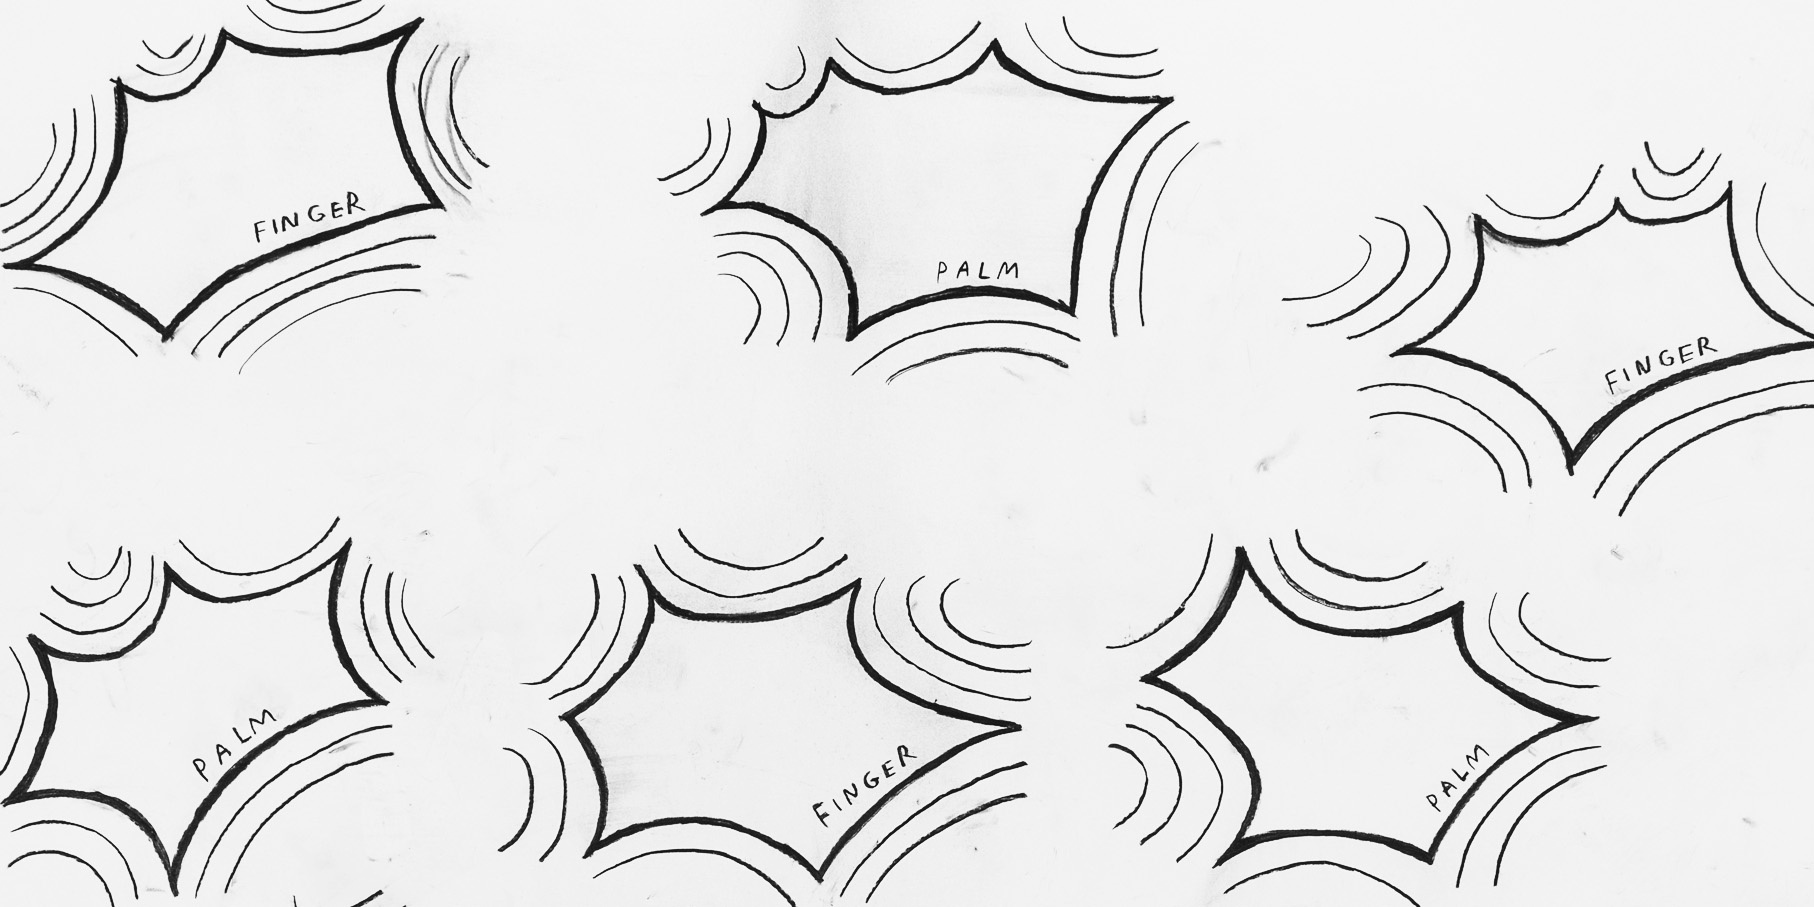 Drawing of hexagons with curved sides, each with additional curved lines around them like waves emanating from them. Inside each one is either the word “palm” or the word “finger.”